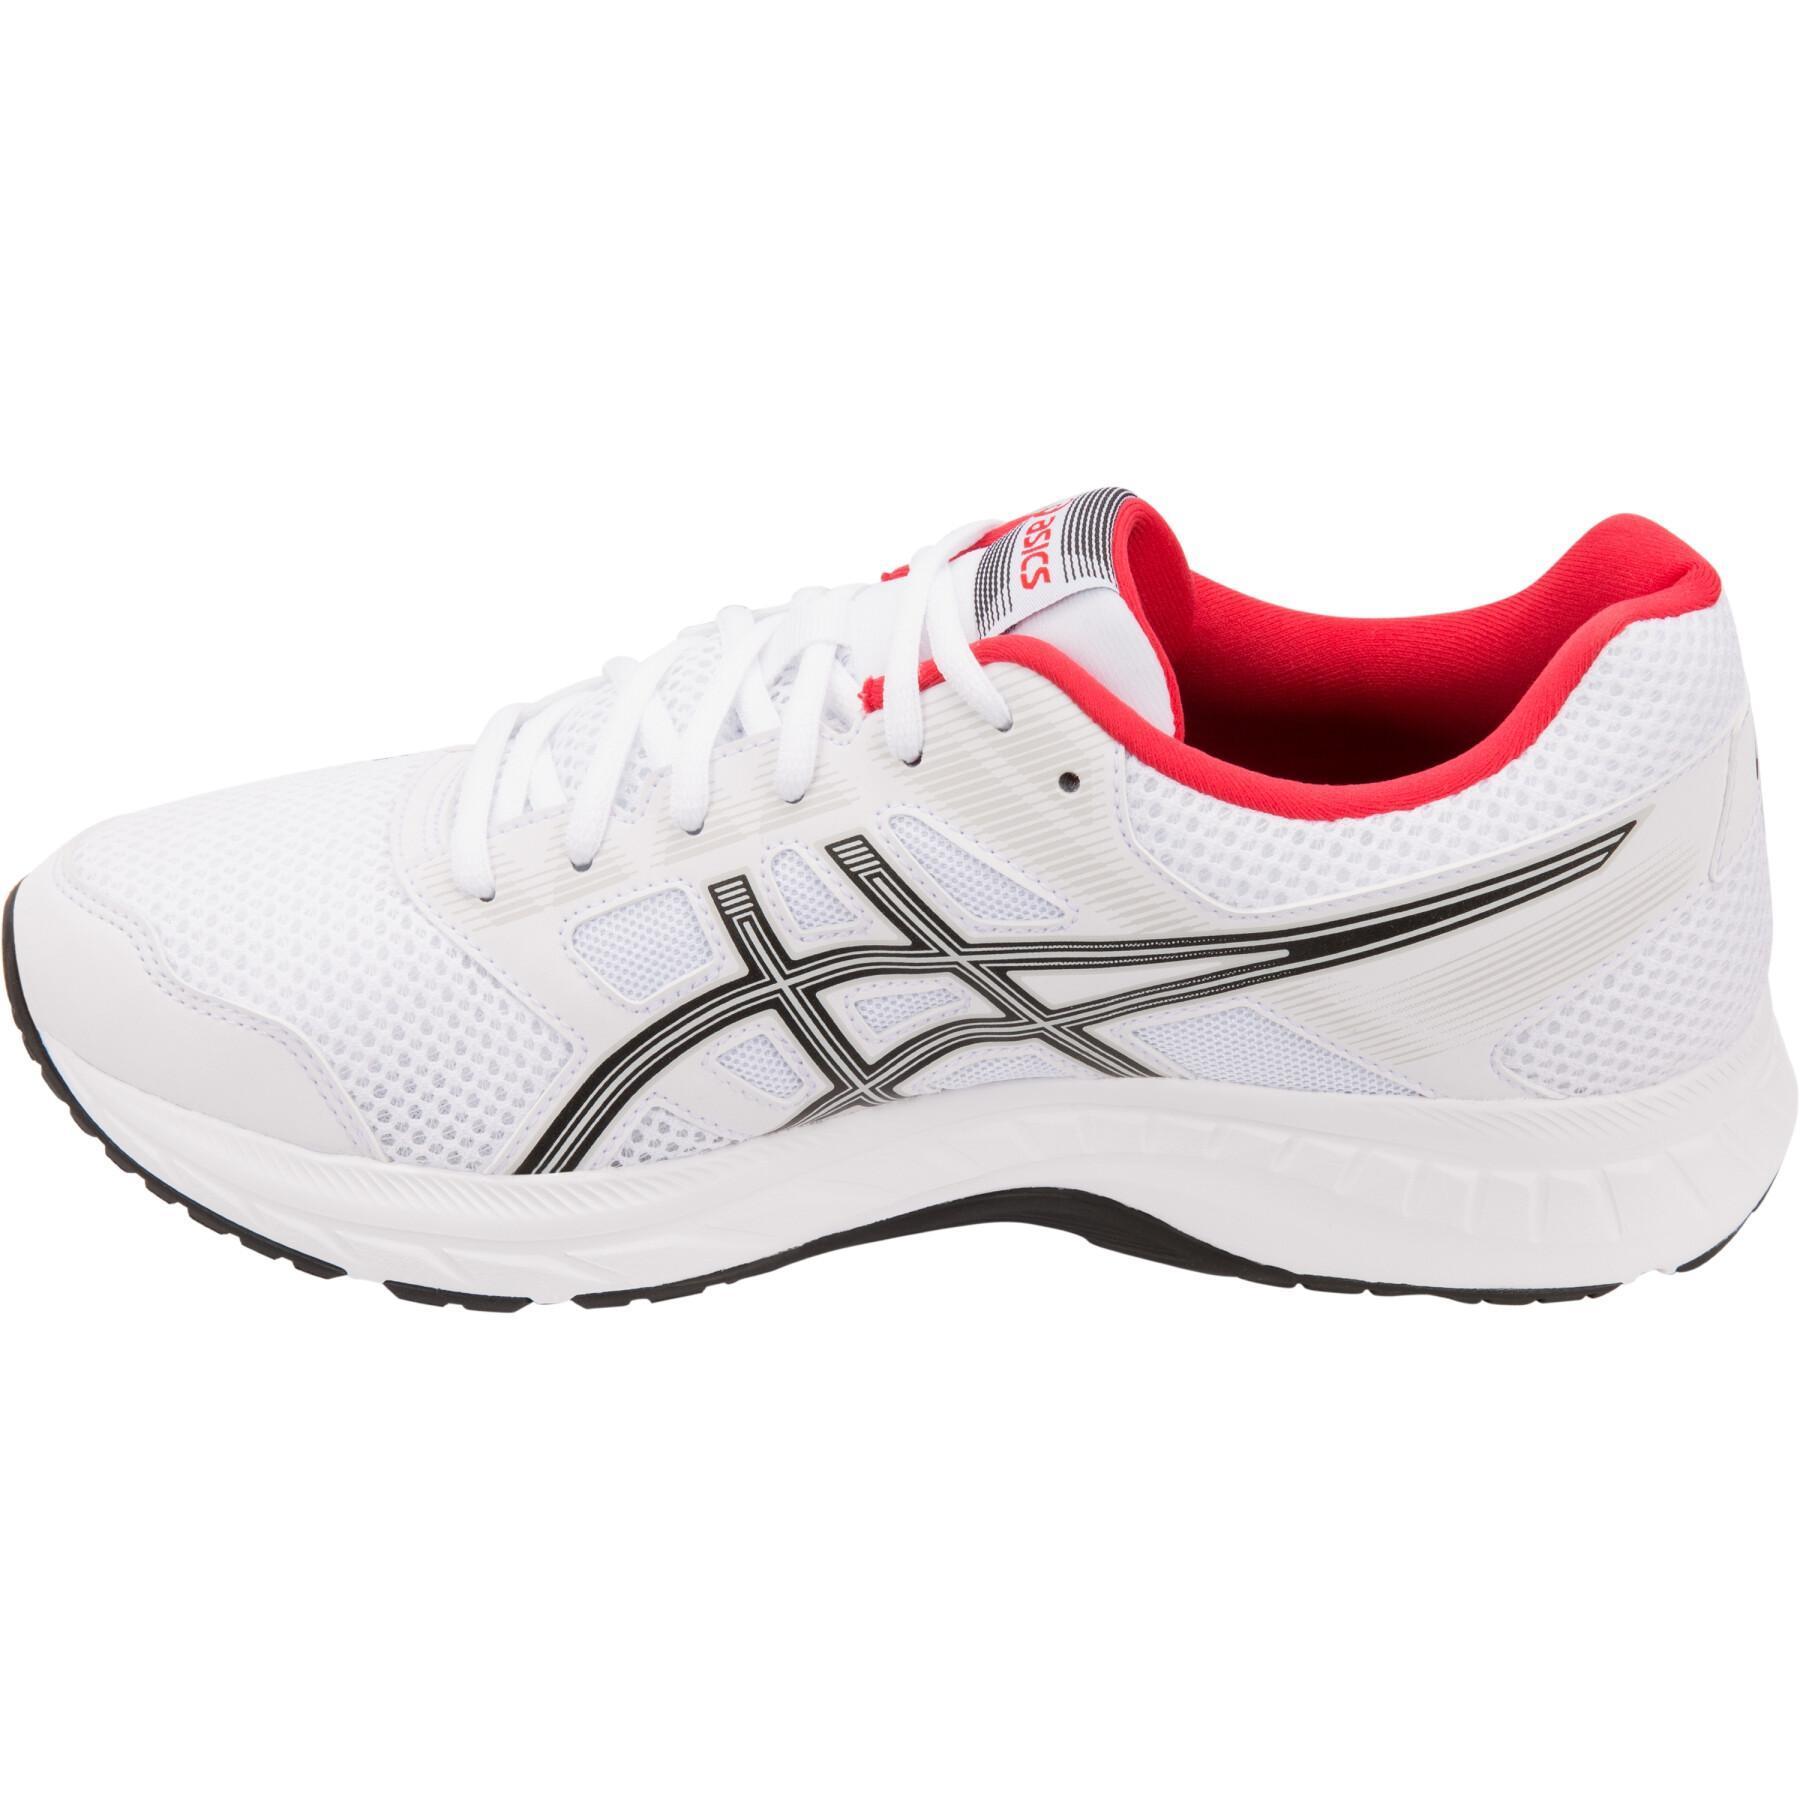 Shoes Asics Gel-Contend 5